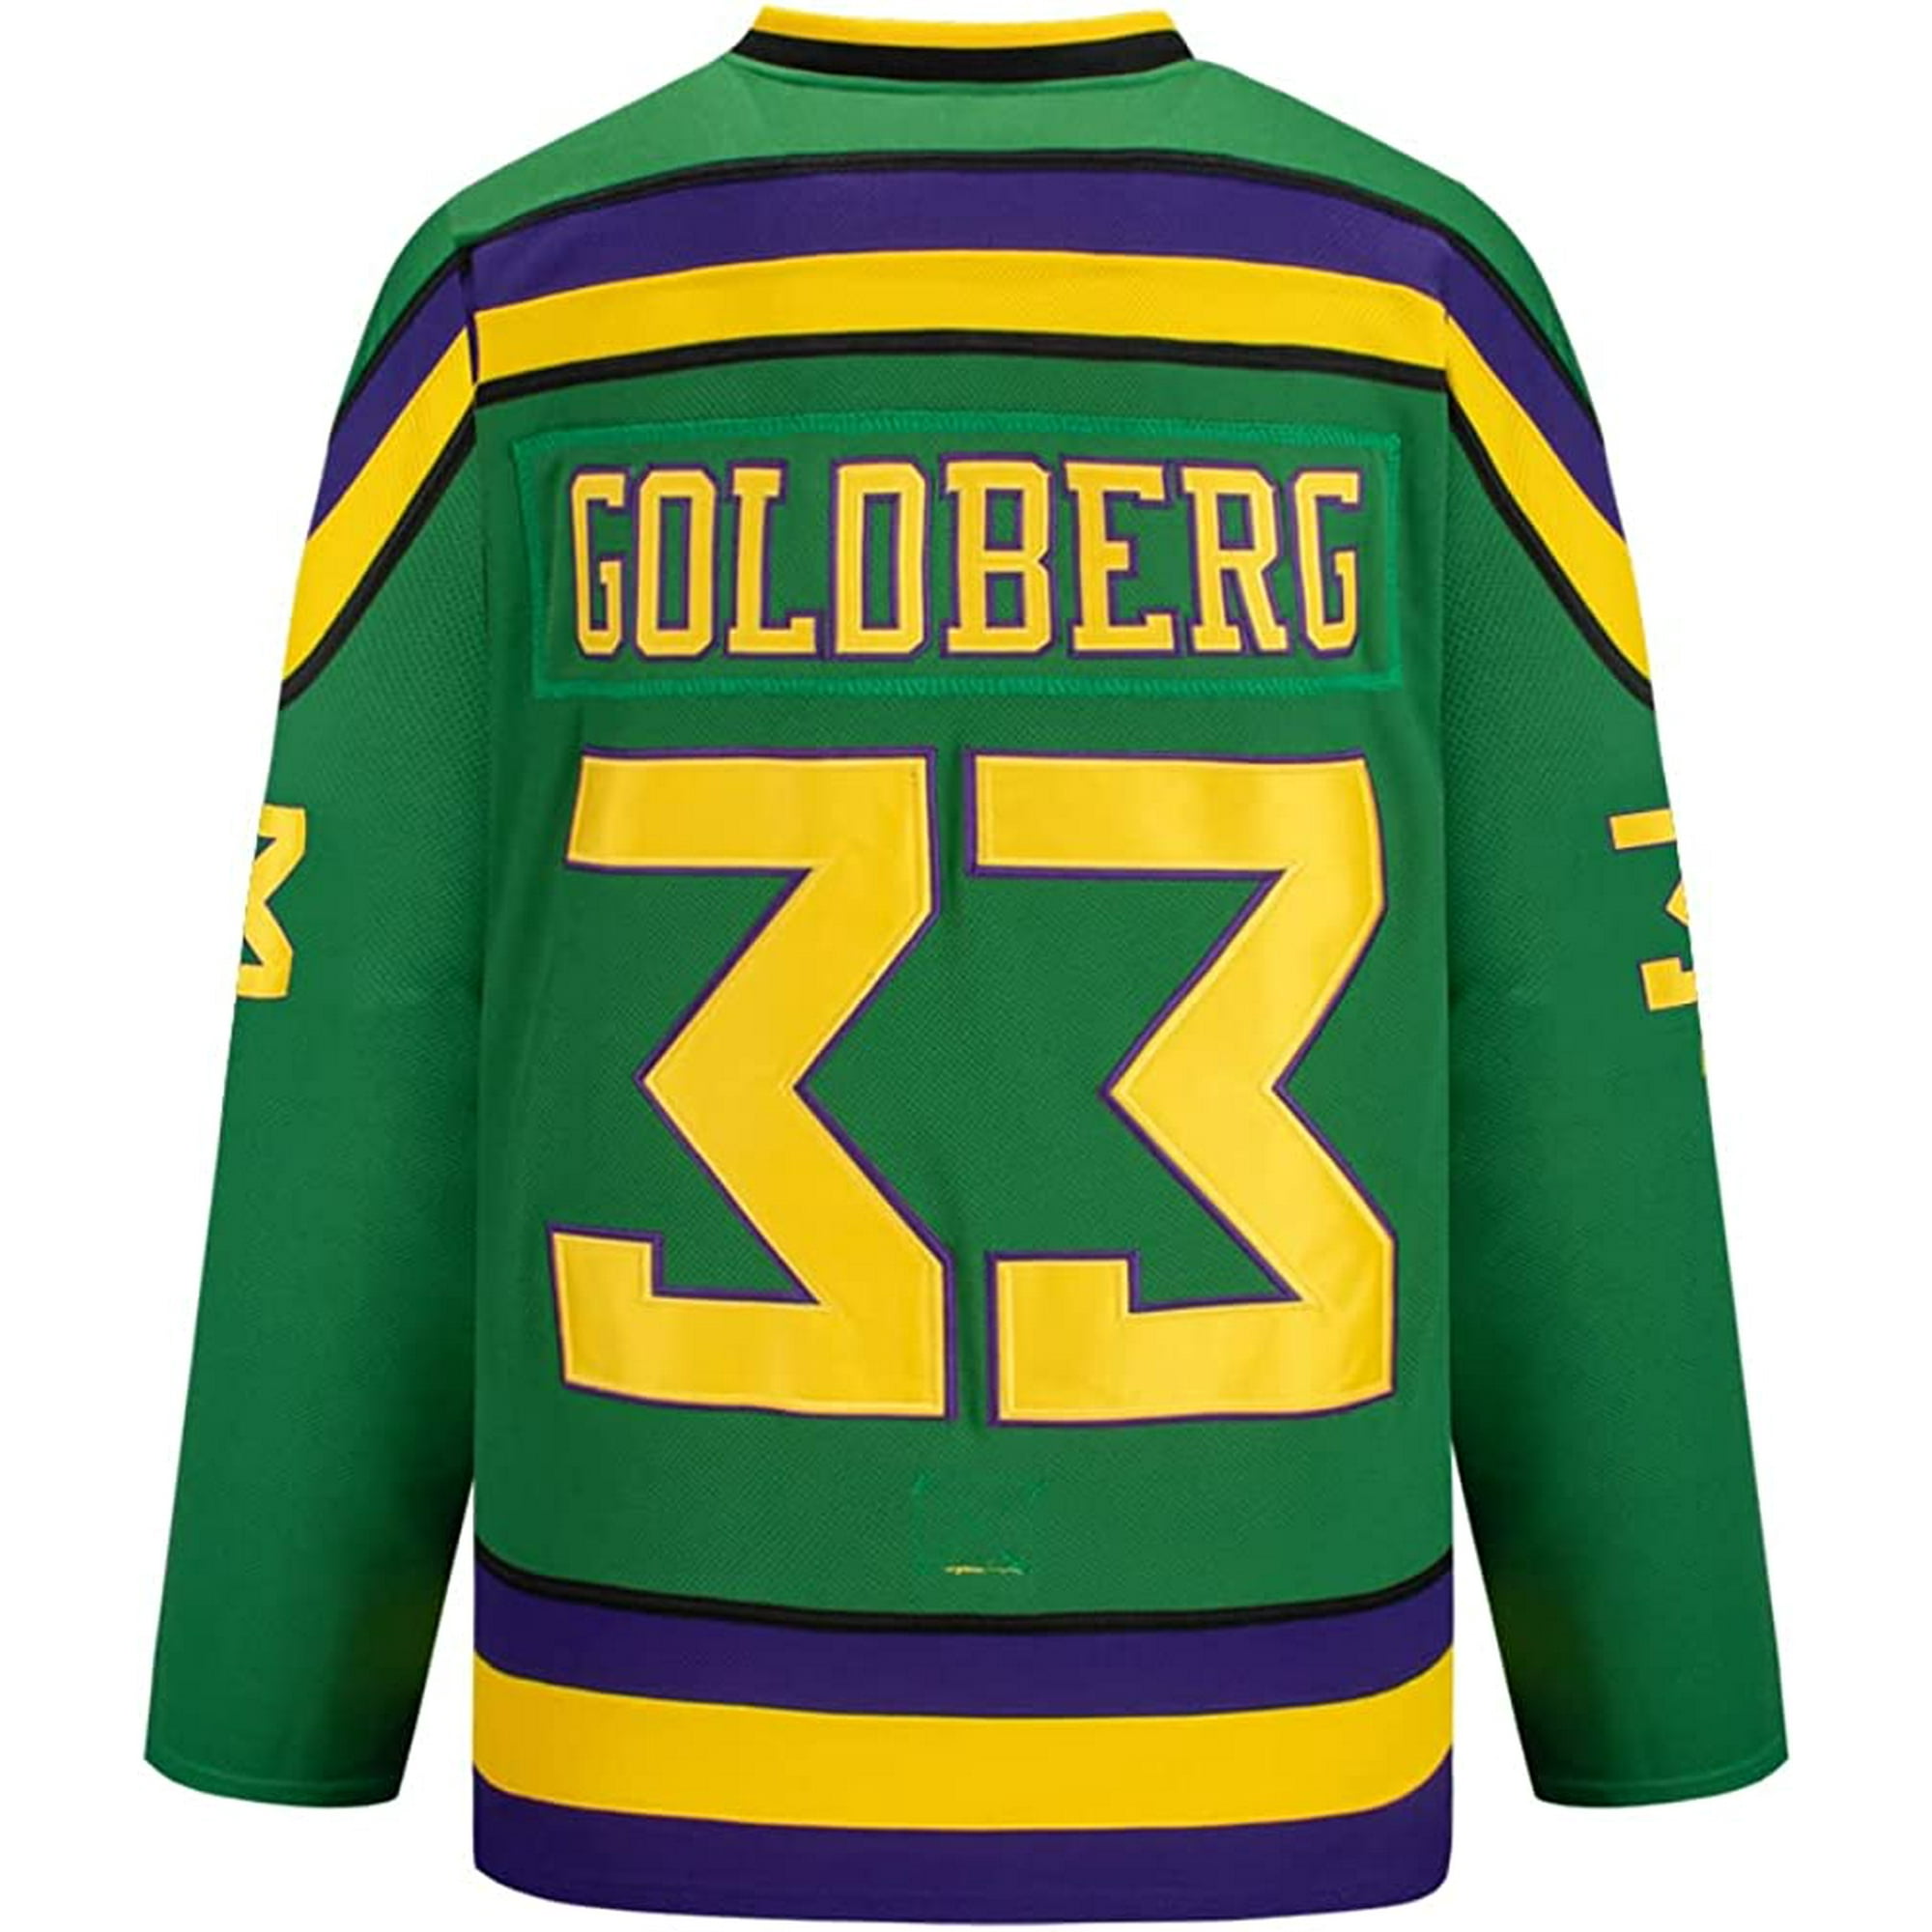 oldtimetown Mighty Ducks Movie Hockey Jersey 90S Hip Hop Adults Clothing  for Party, Stitched Letters and Numbers 